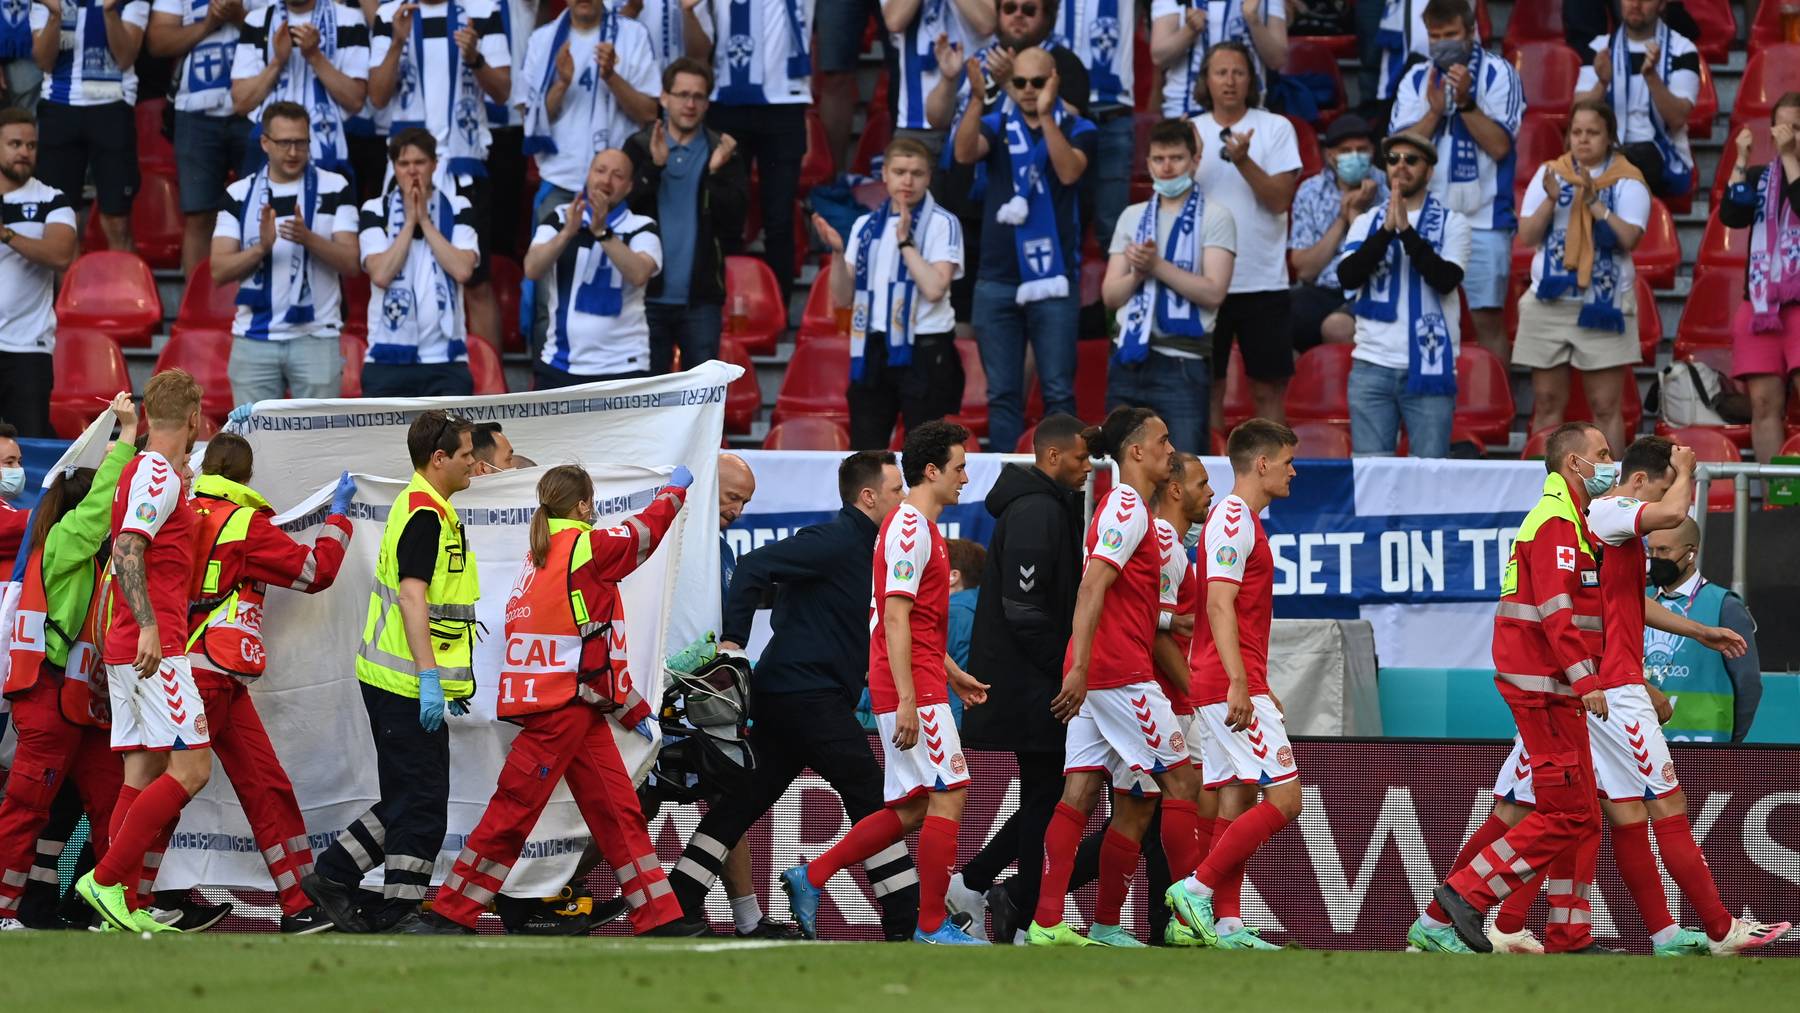 Supporters of Finland react while Christian Eriksen (hidden) of Denmark is carried from the pitch during the UEFA EURO 2020 group B preliminary round soccer match between Denmark and Finland in Copenhagen, Denmark, 12 June 2021. 